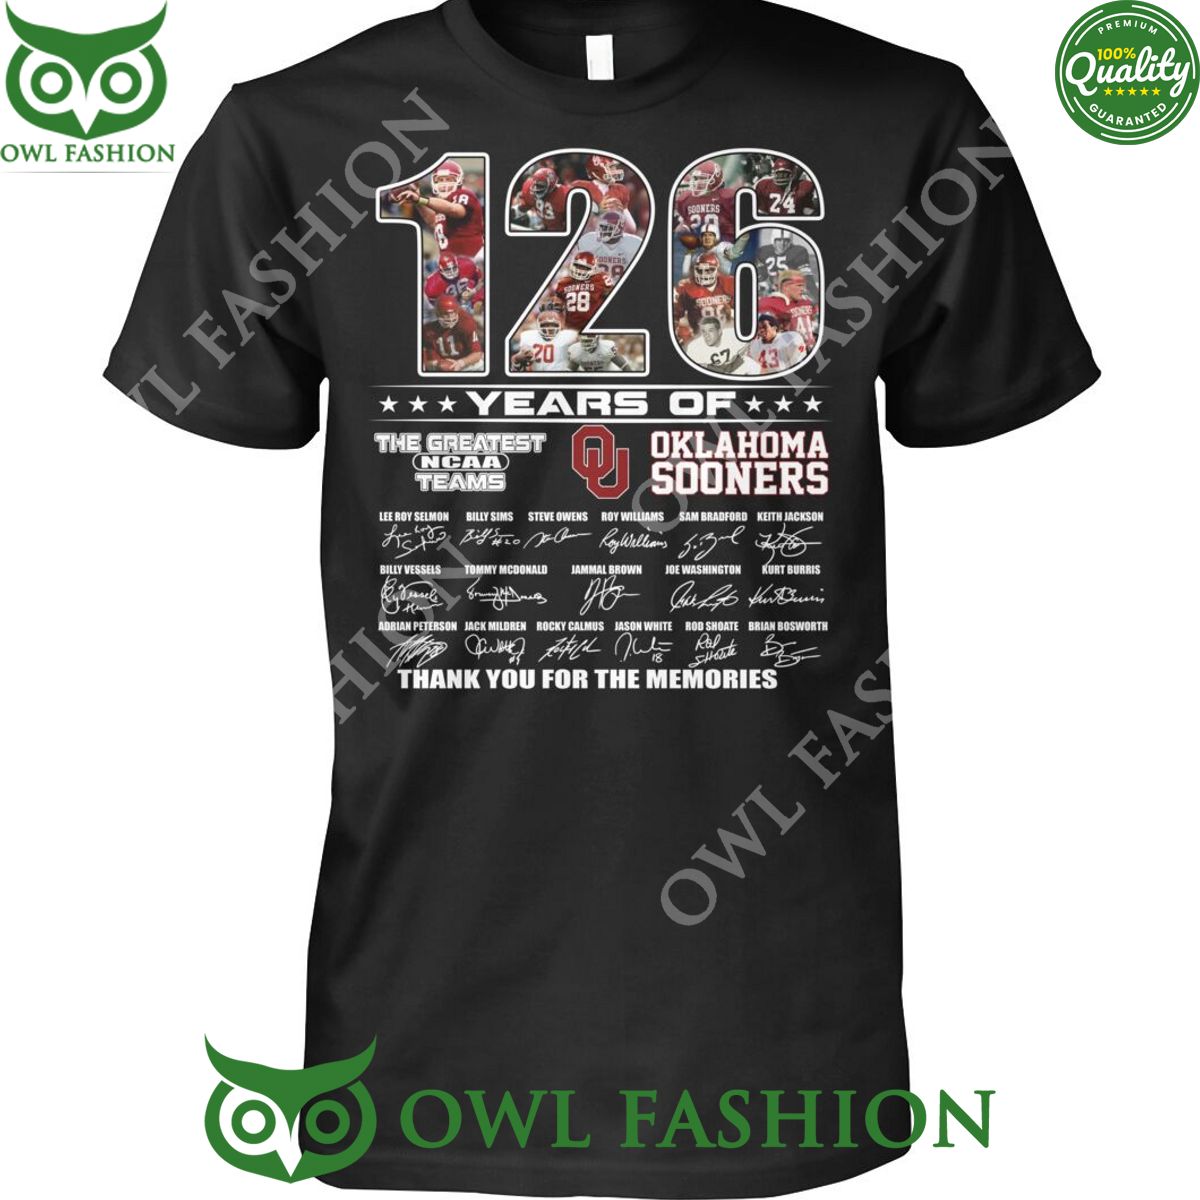 126 years of The Greatest NCAA Teams Oklahoma Sooners Thank for memories t shirt